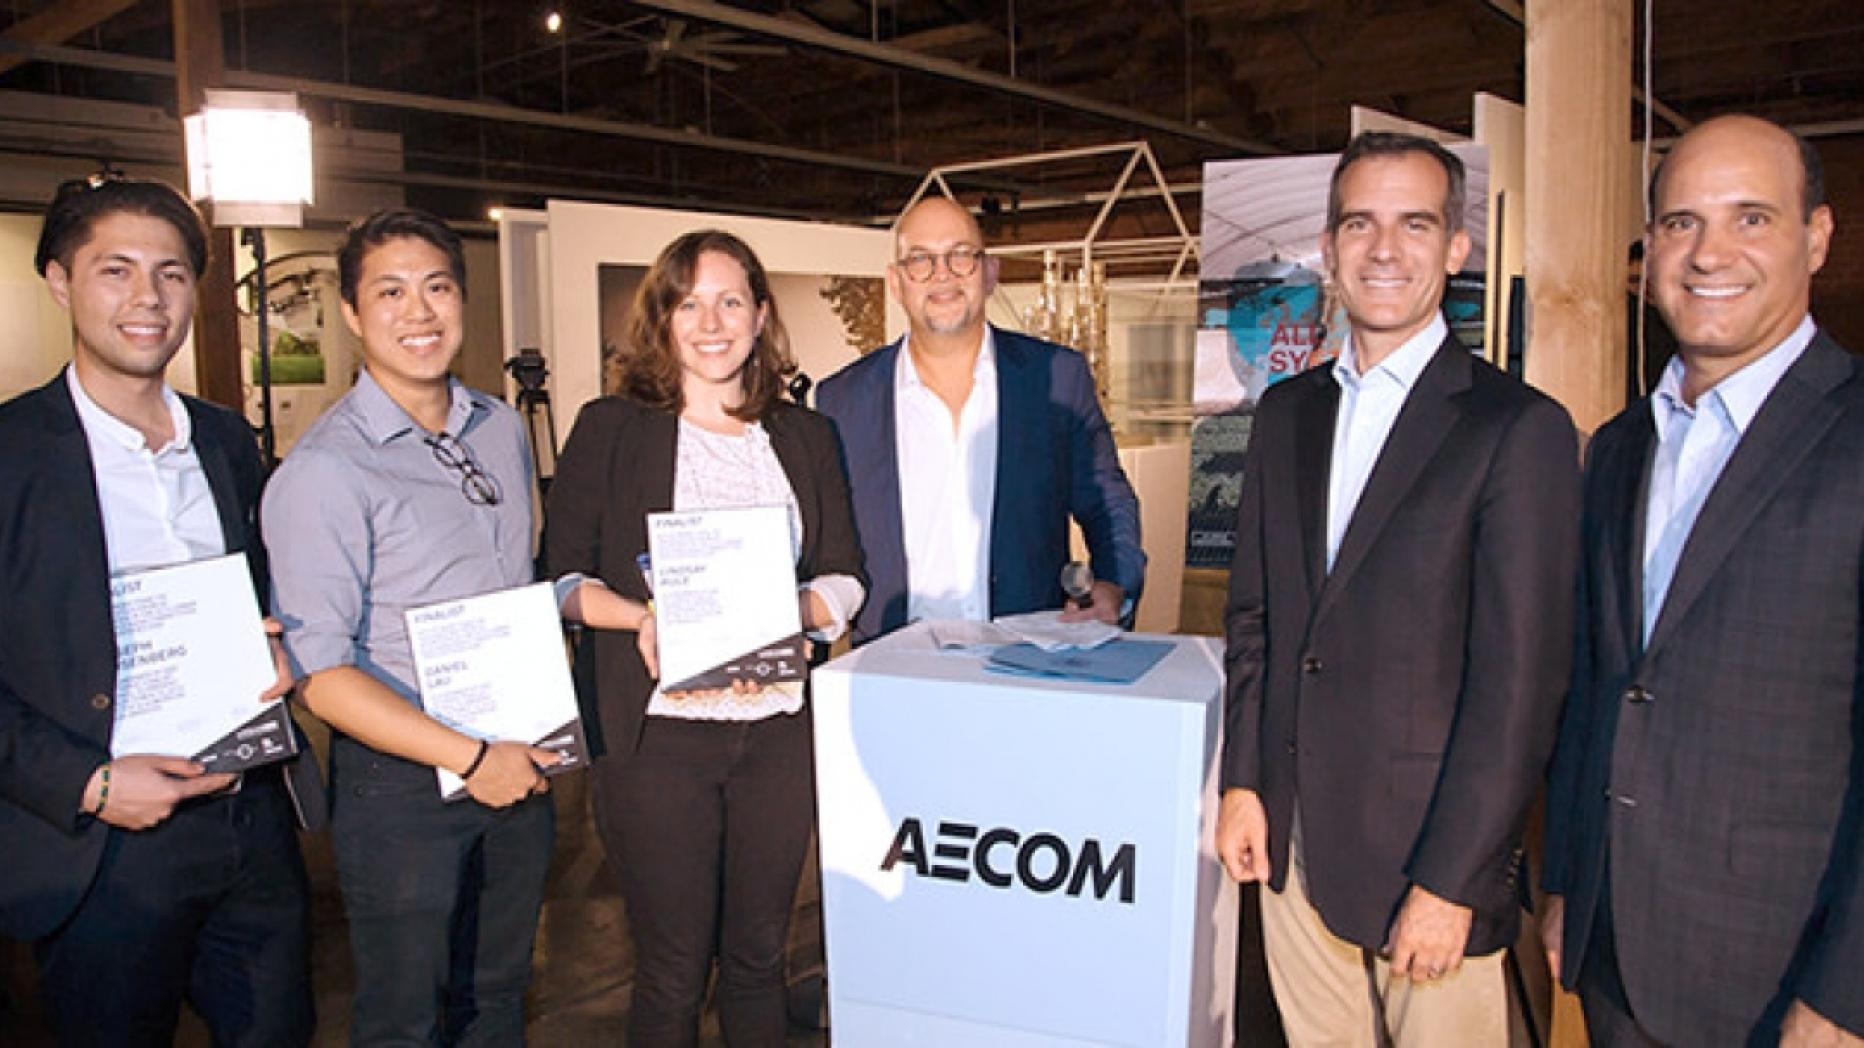 A group of six people pose next to a pedestal with the word AECOM on it